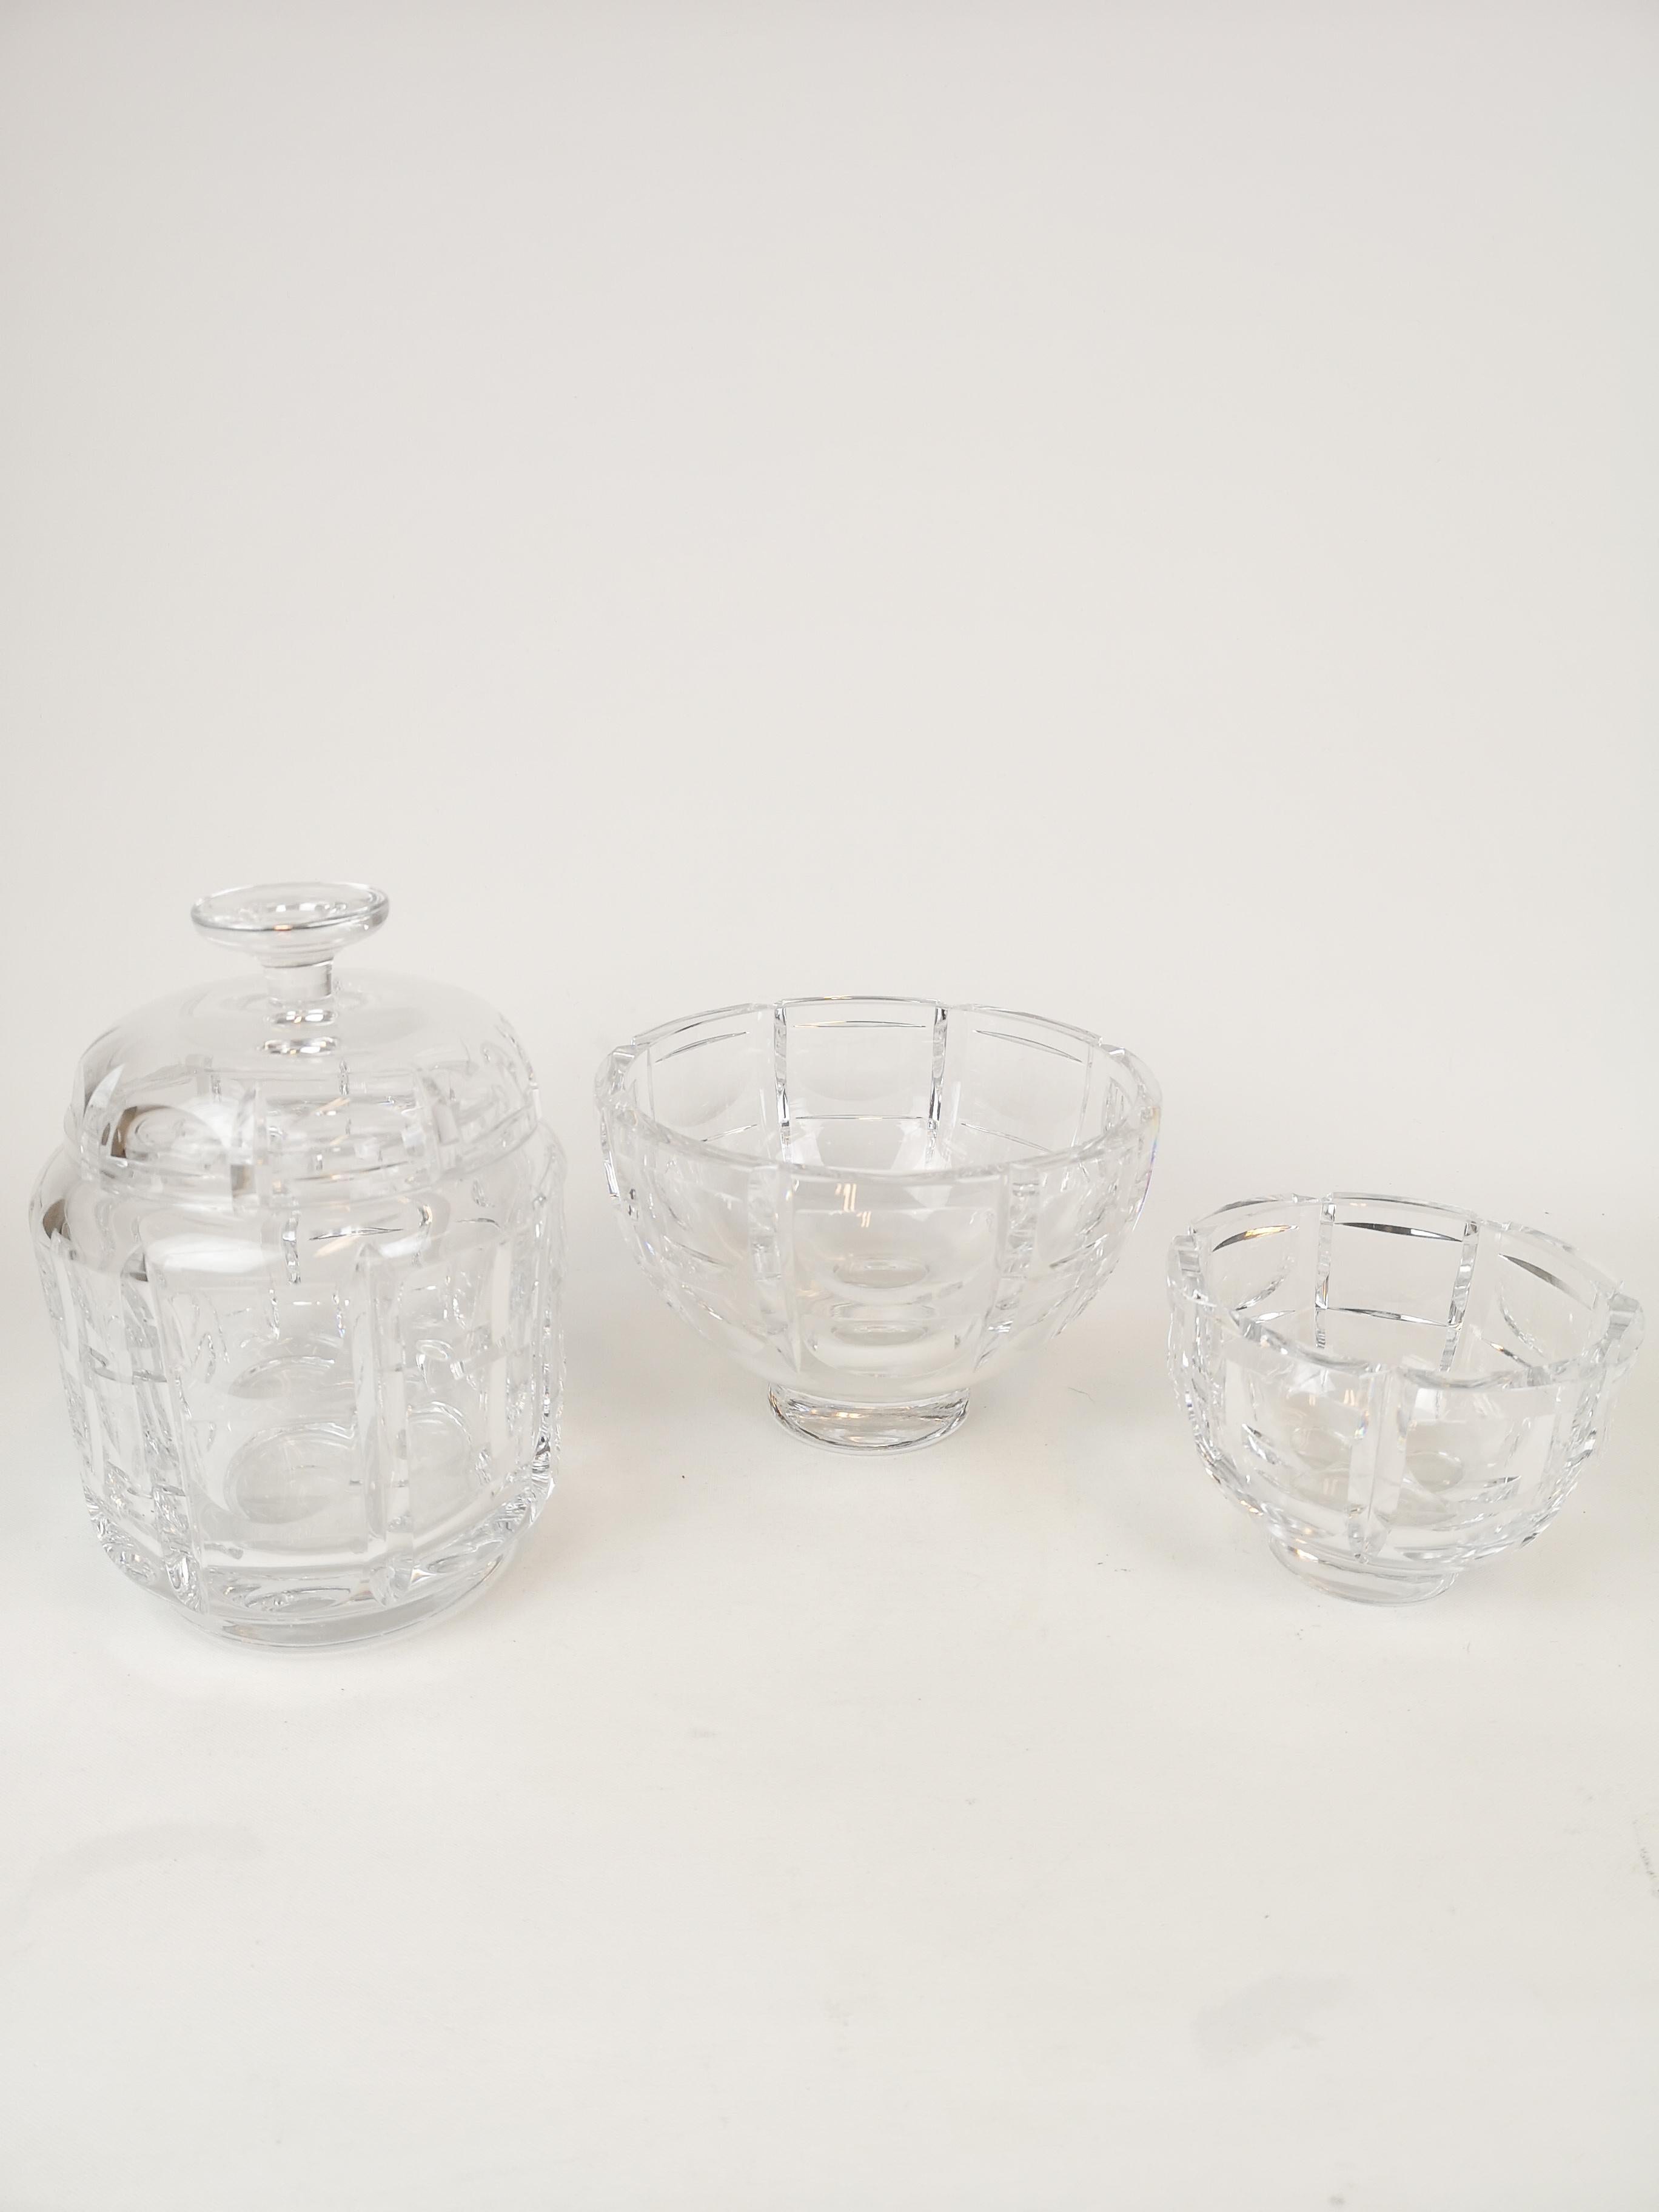 These three pieces from Orrefors Sweden where designed by Simon Gate in the 1930s. The name of them are 